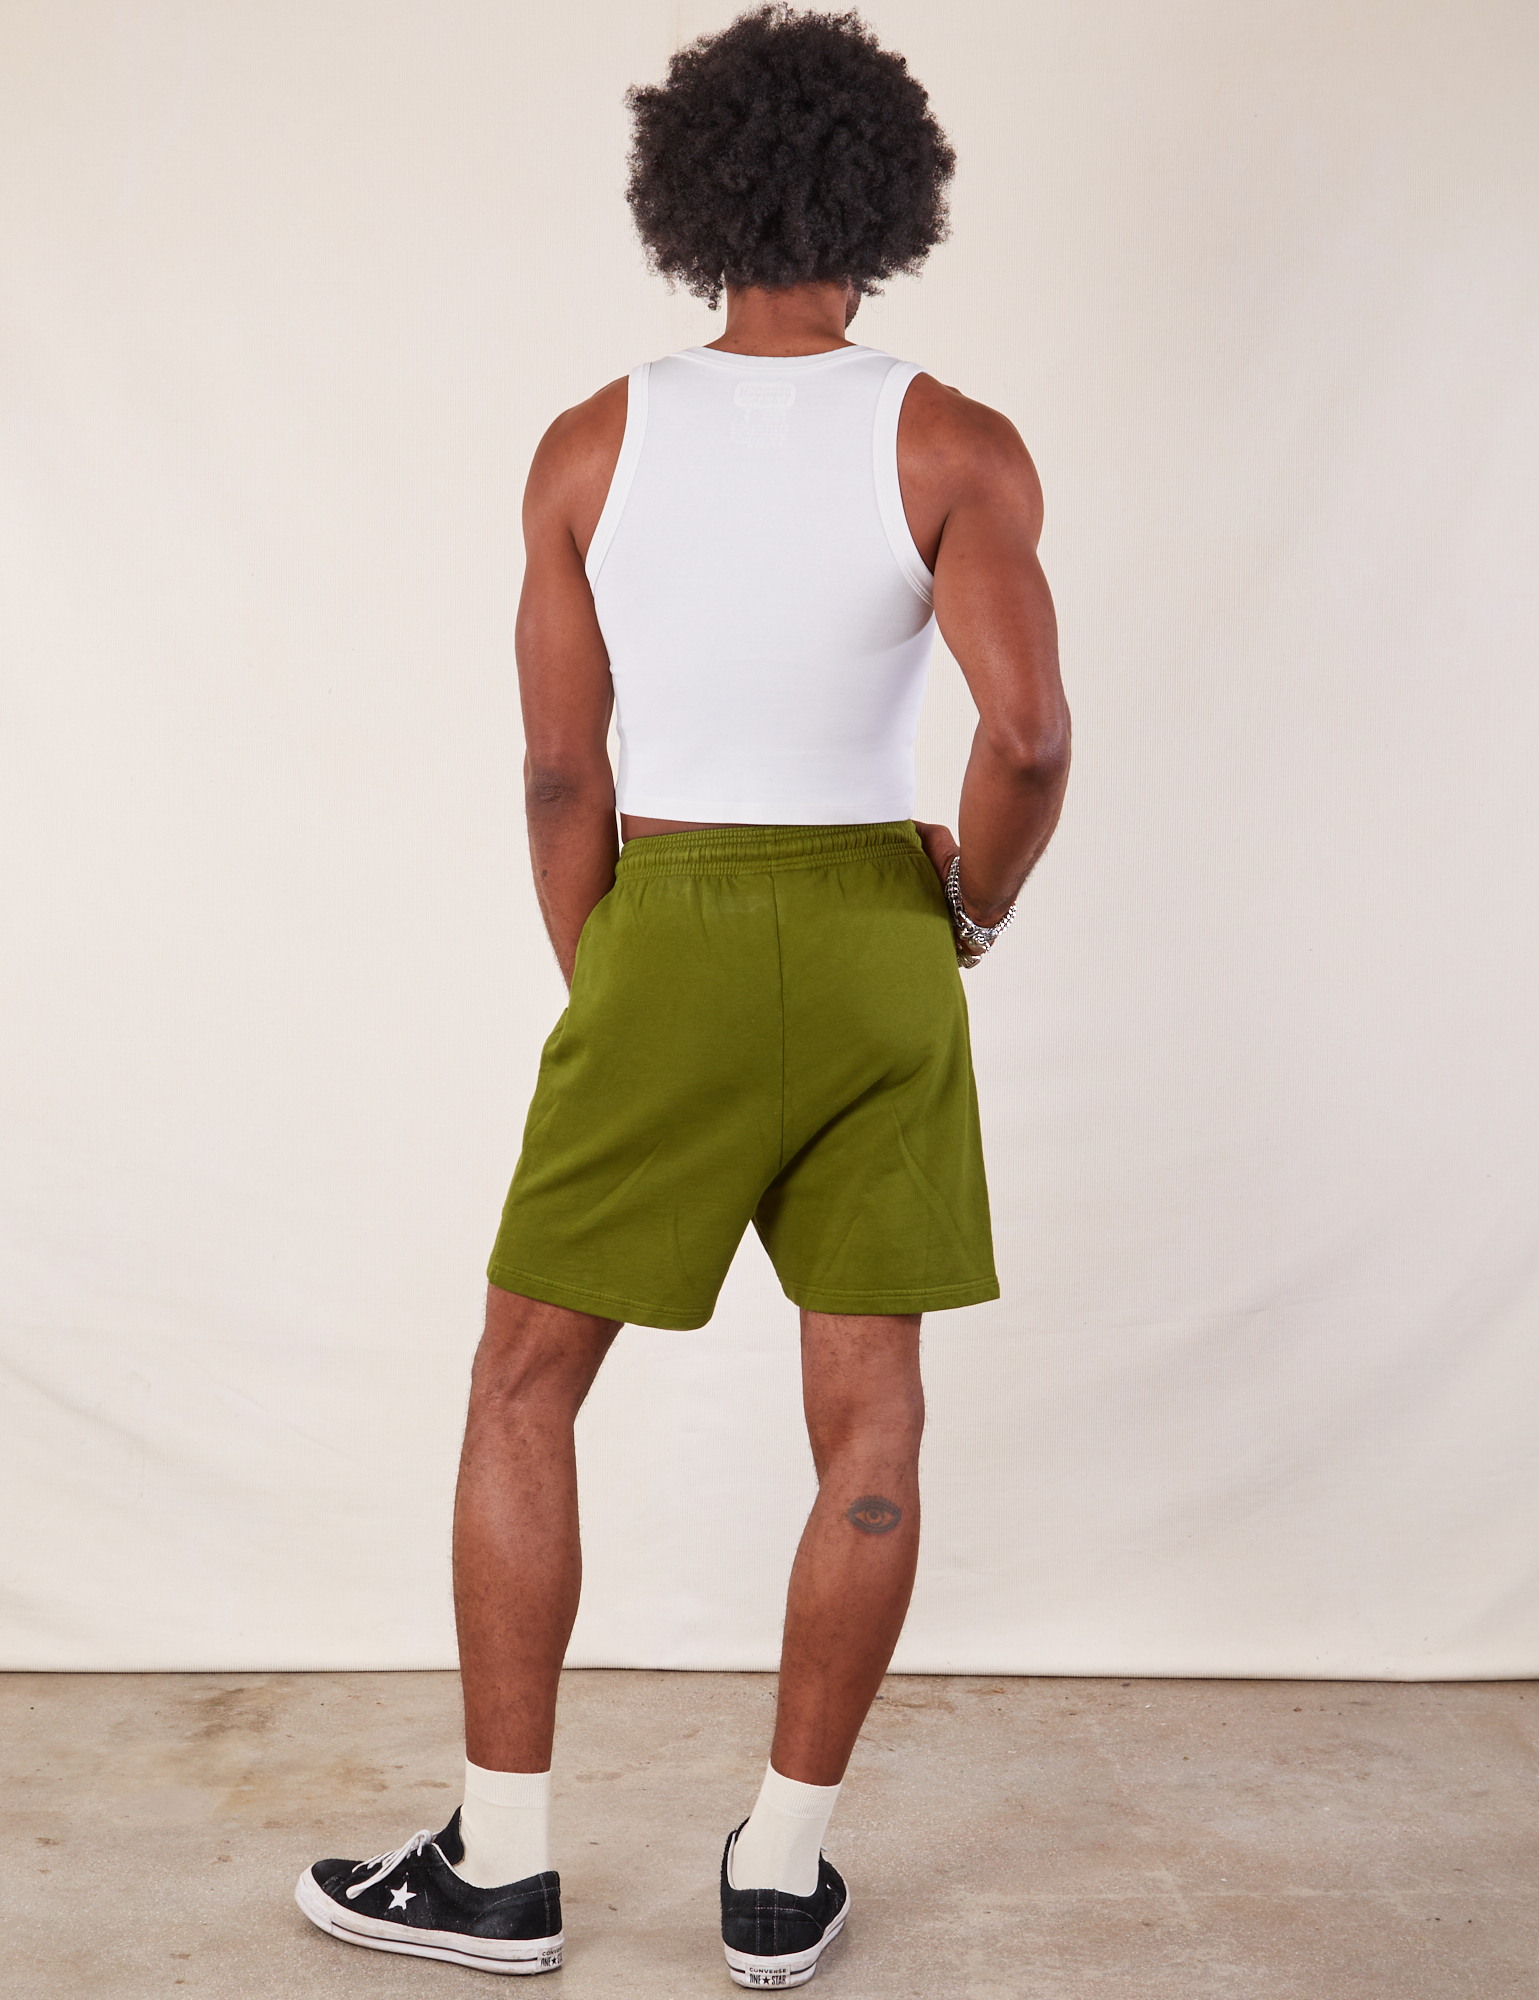 Back view of Lightweight Sweat Shorts in Summer Olive and Cropped Tank in vintage tee off-white on Jerrod